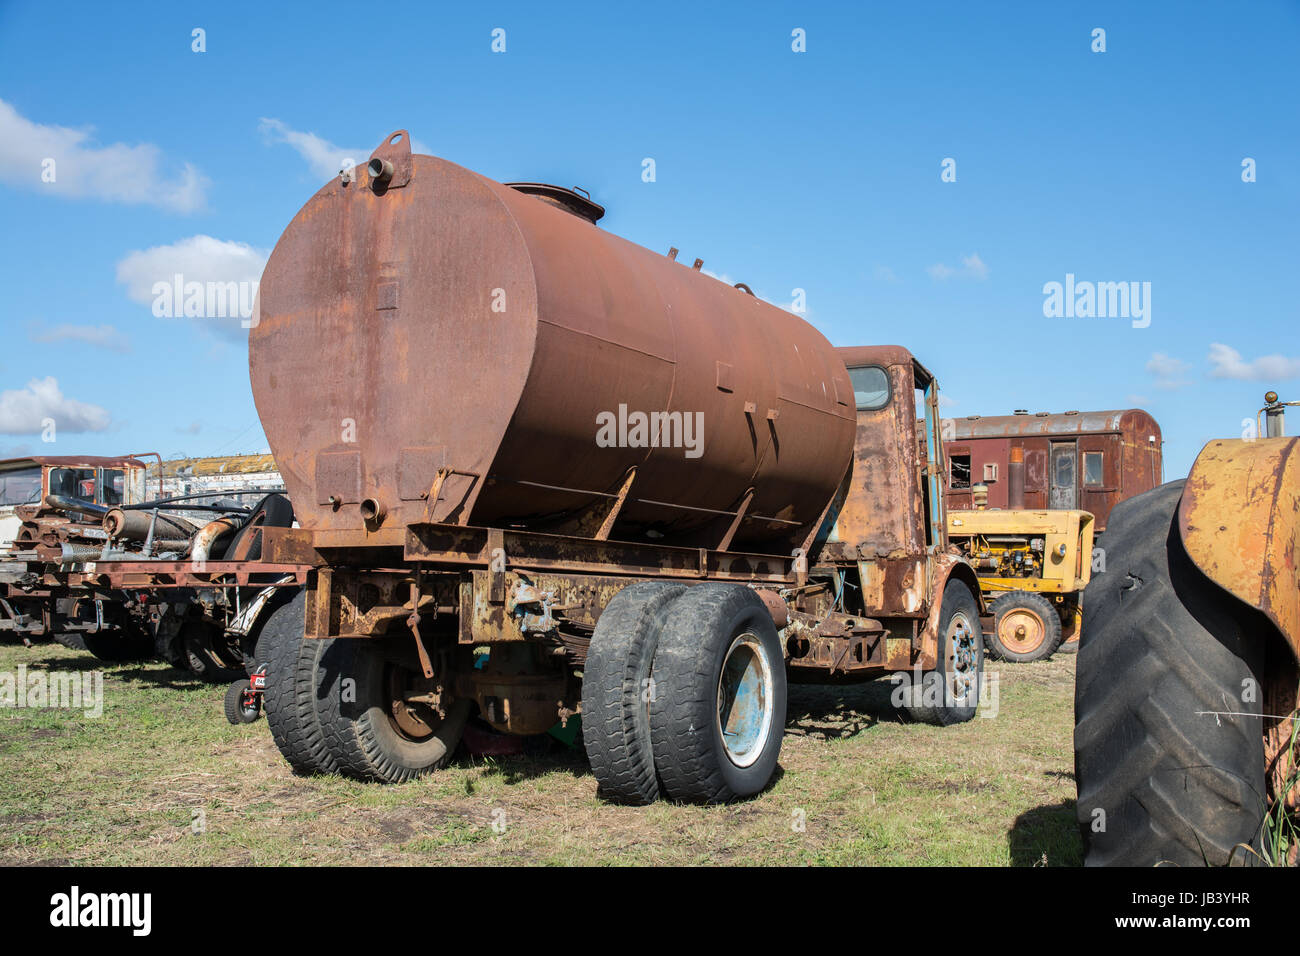 Old AEC Matador Tanker Truck in a Vehicle Graveyard. Stock Photo